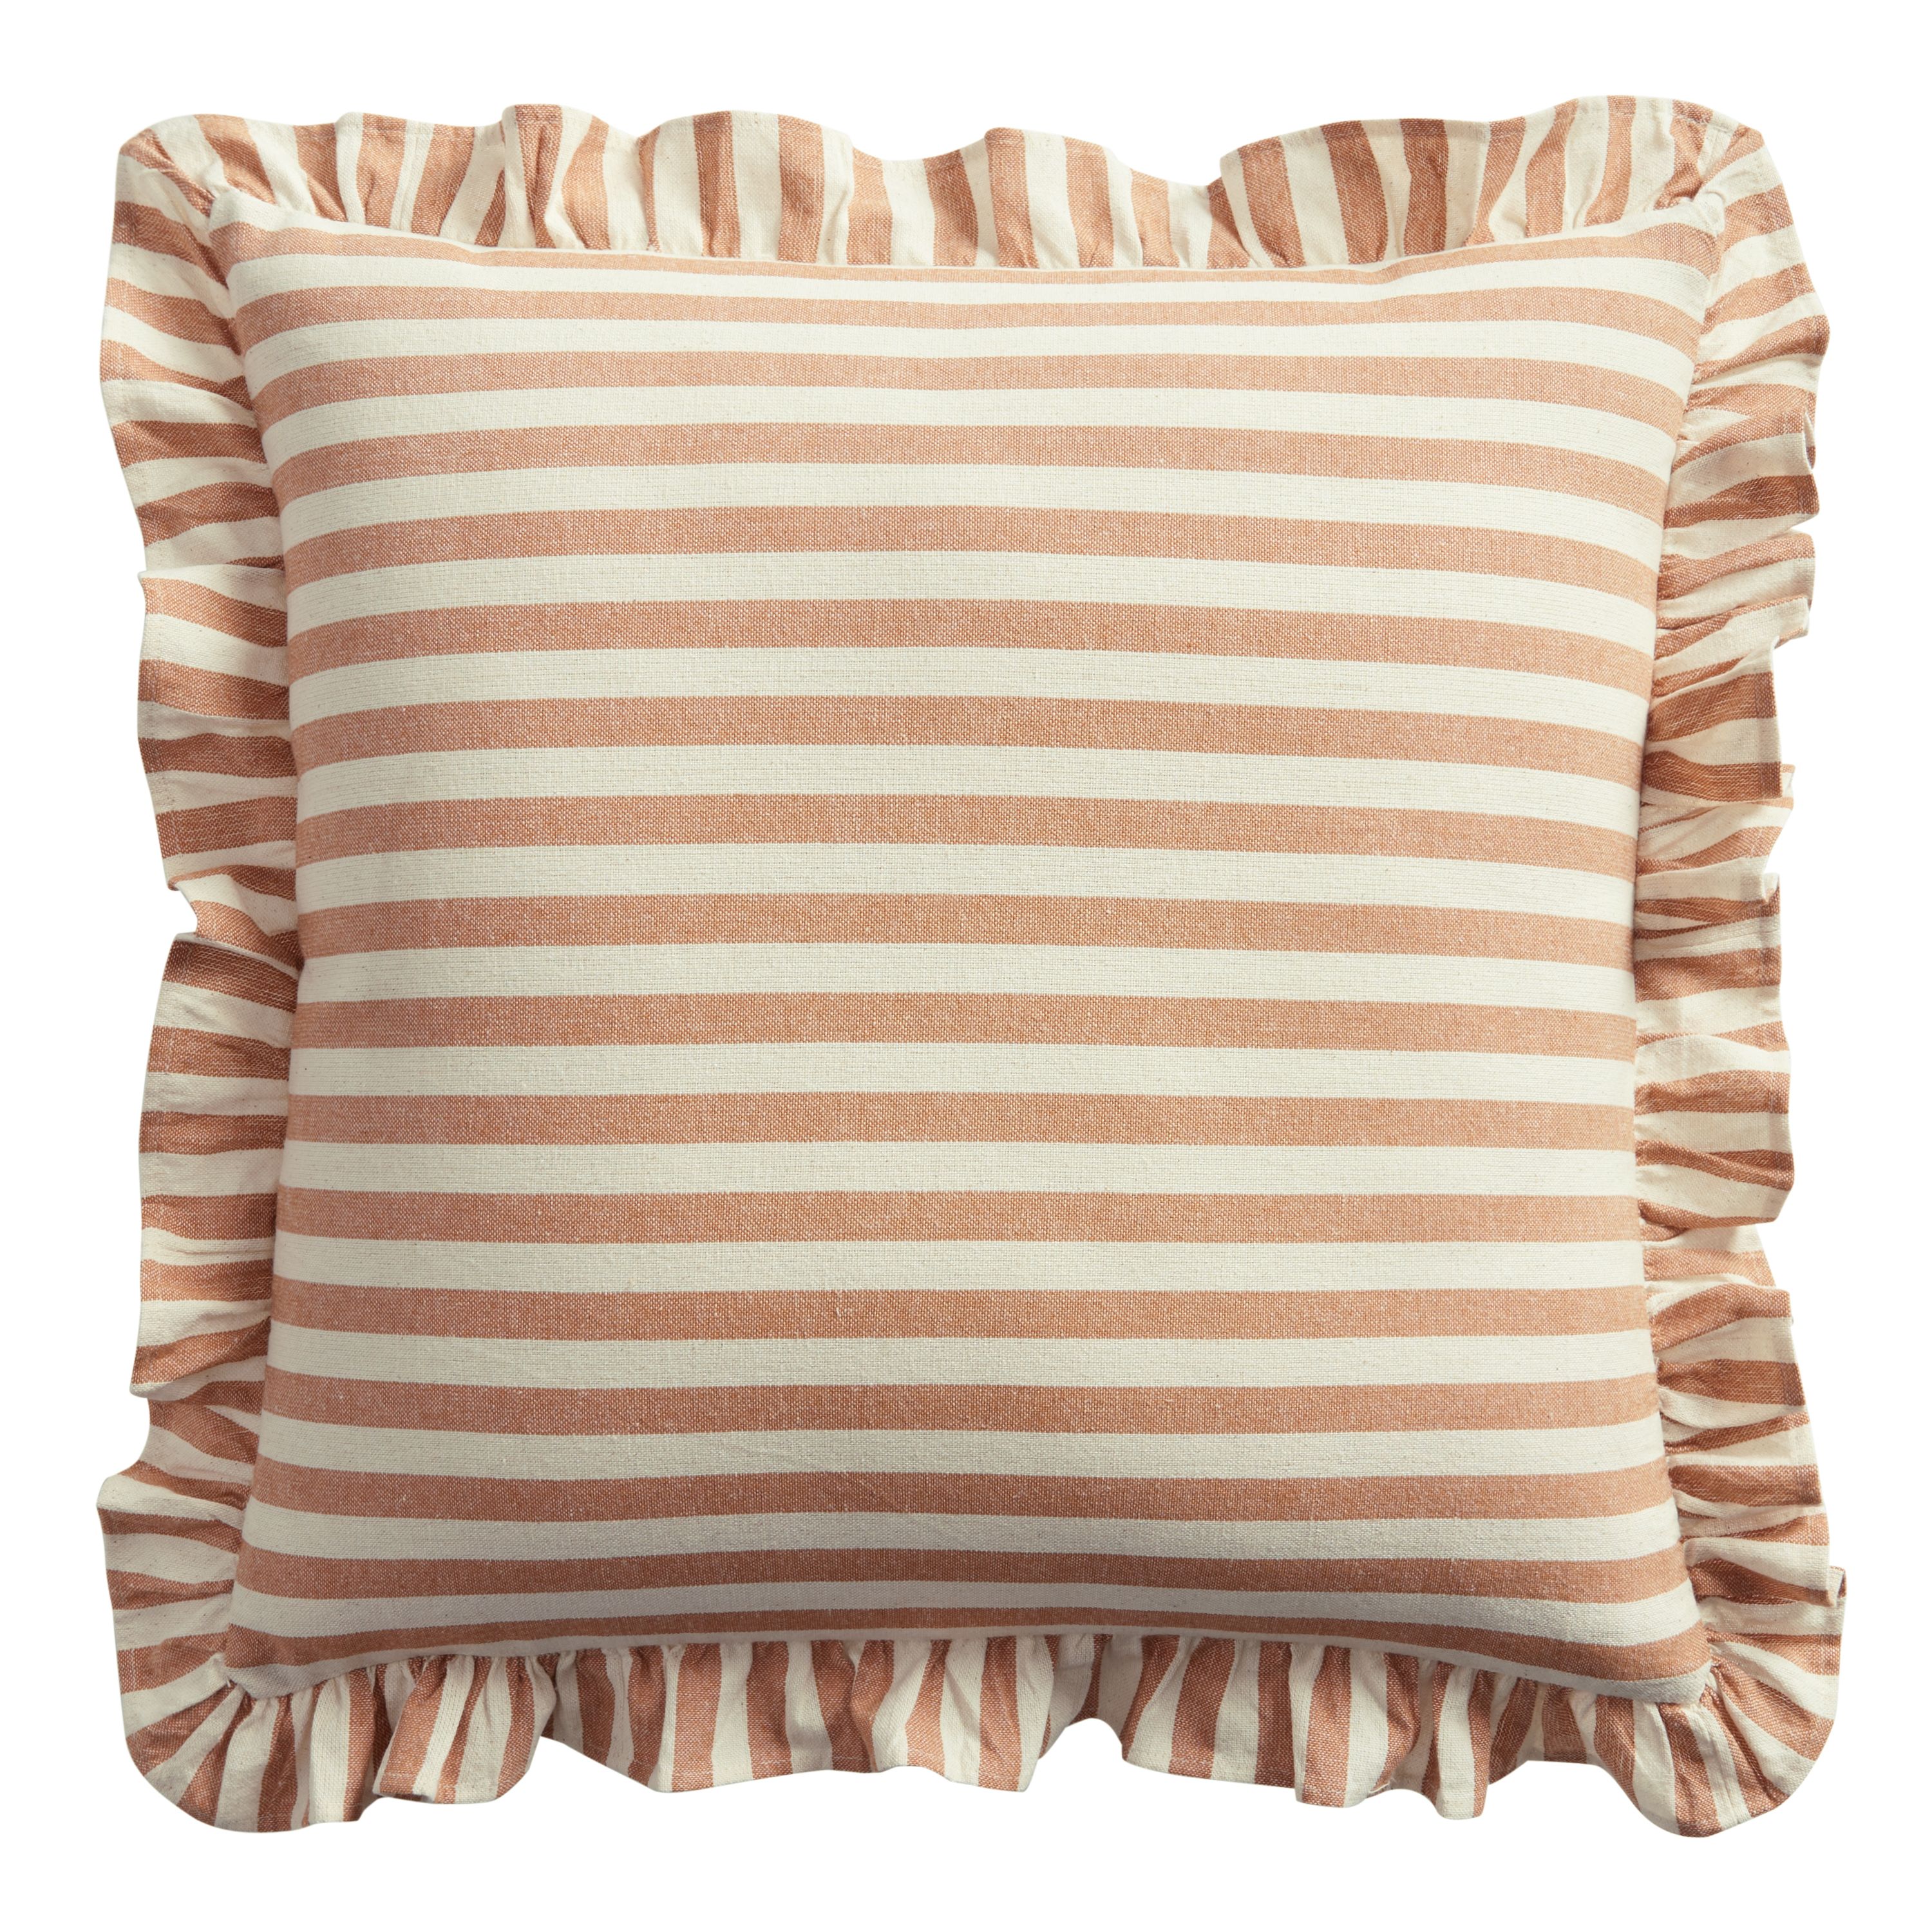 Ivory And Rust Striped Throw Pillow With Ruffle | World Market